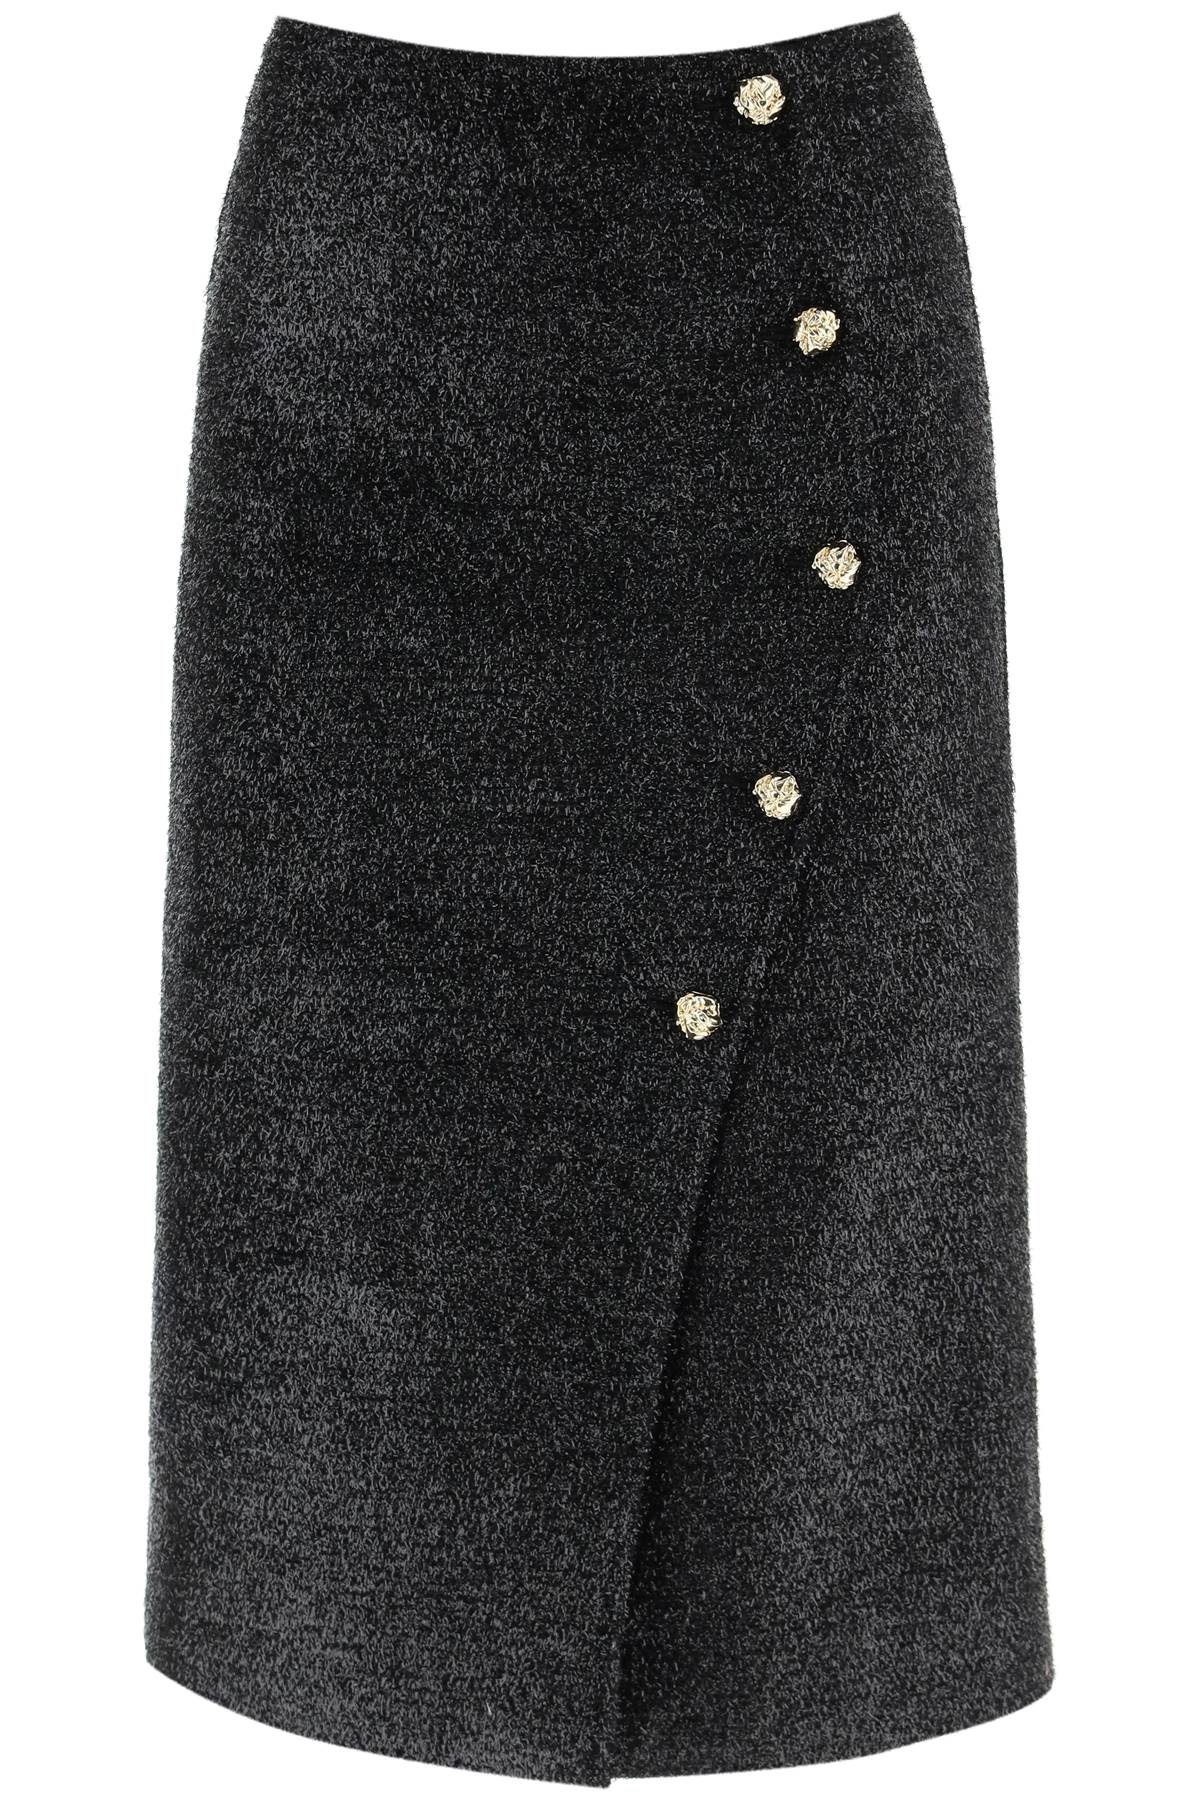 Ganni Metallic Tweed Wrap Skirt With Embossed Buttons